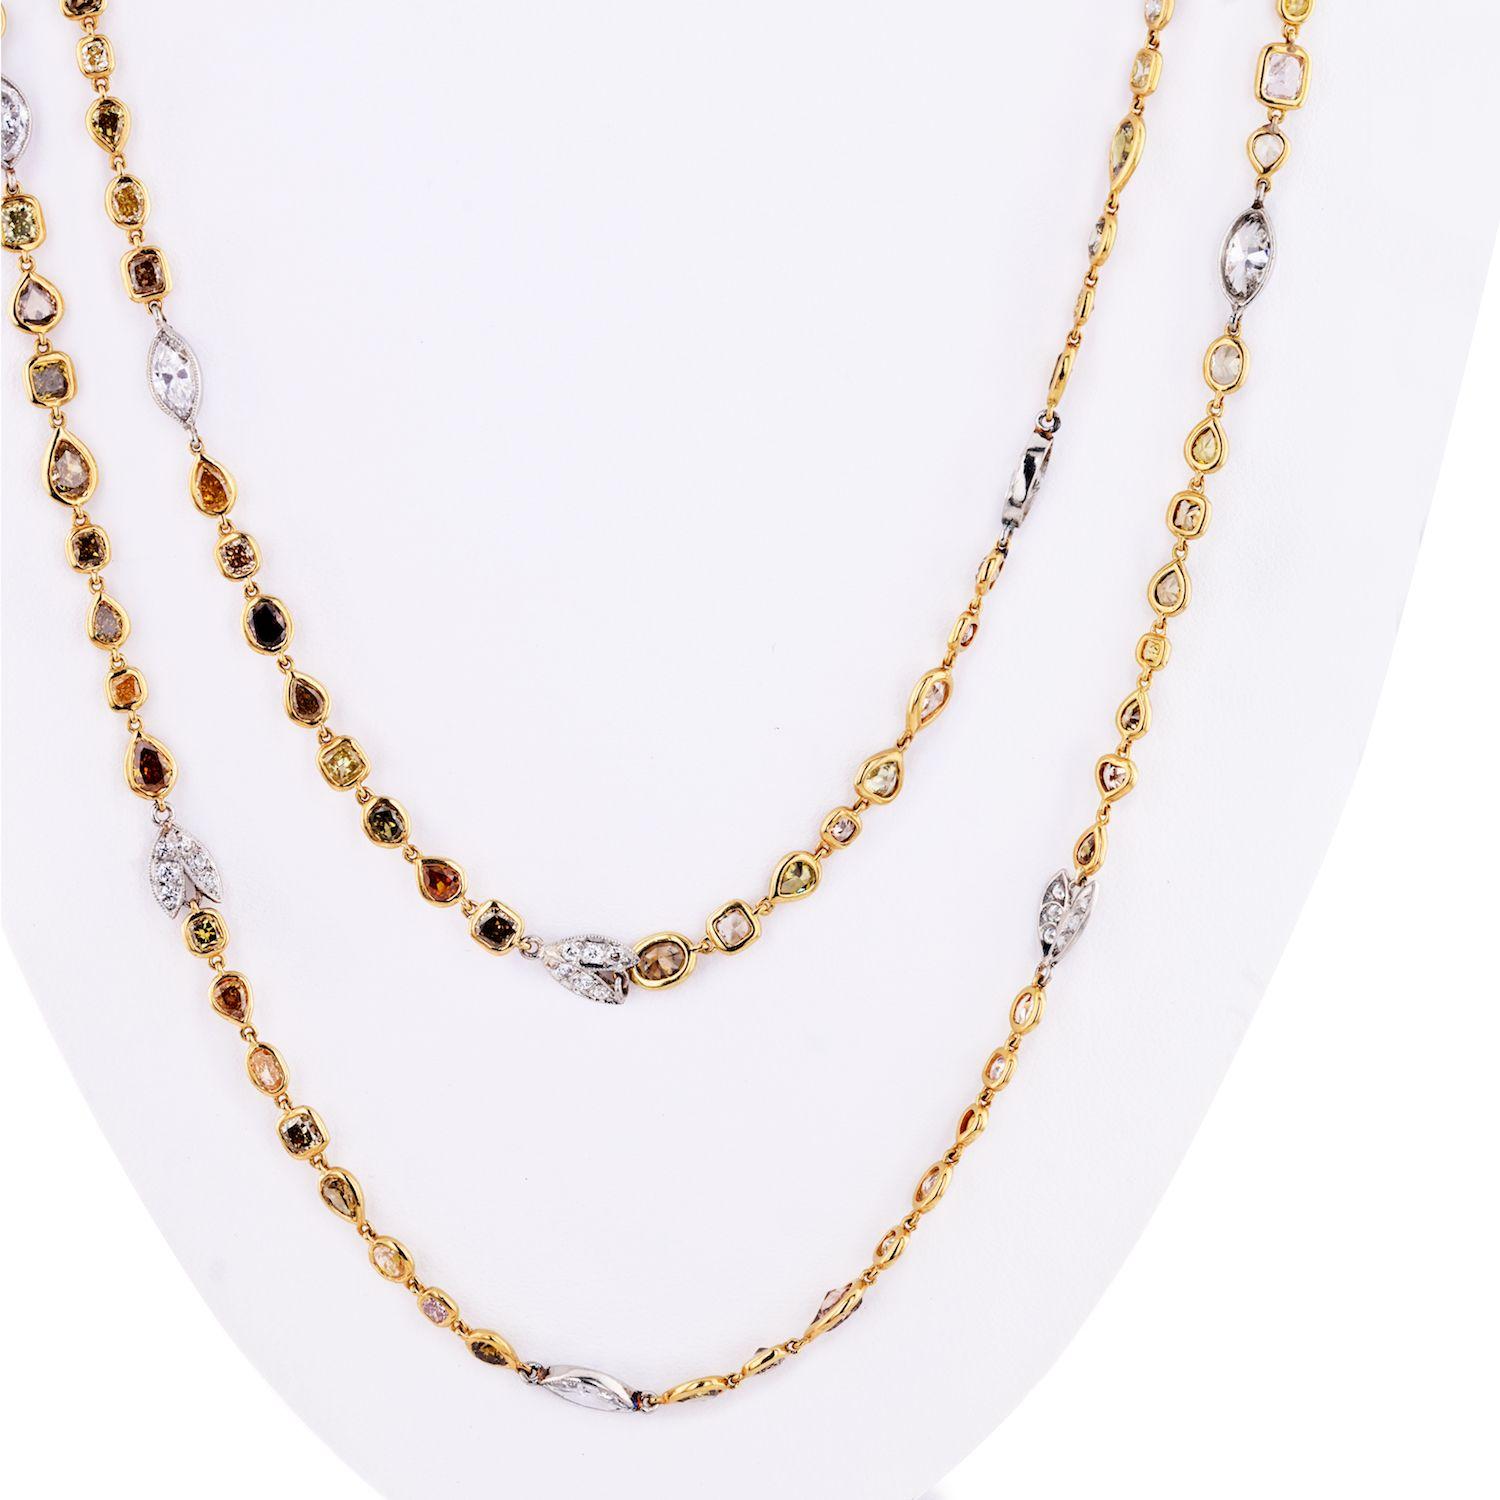 Platinum & 18K Yellow Gold 41 carat Fancy Color And White Diamonds by the Yard Necklace.
Handmade with our in-house jewelers this is a fun and lively necklace featuring 208 natural colored diamonds, and 91 white diamonds.
Total carat weight 41cttw.